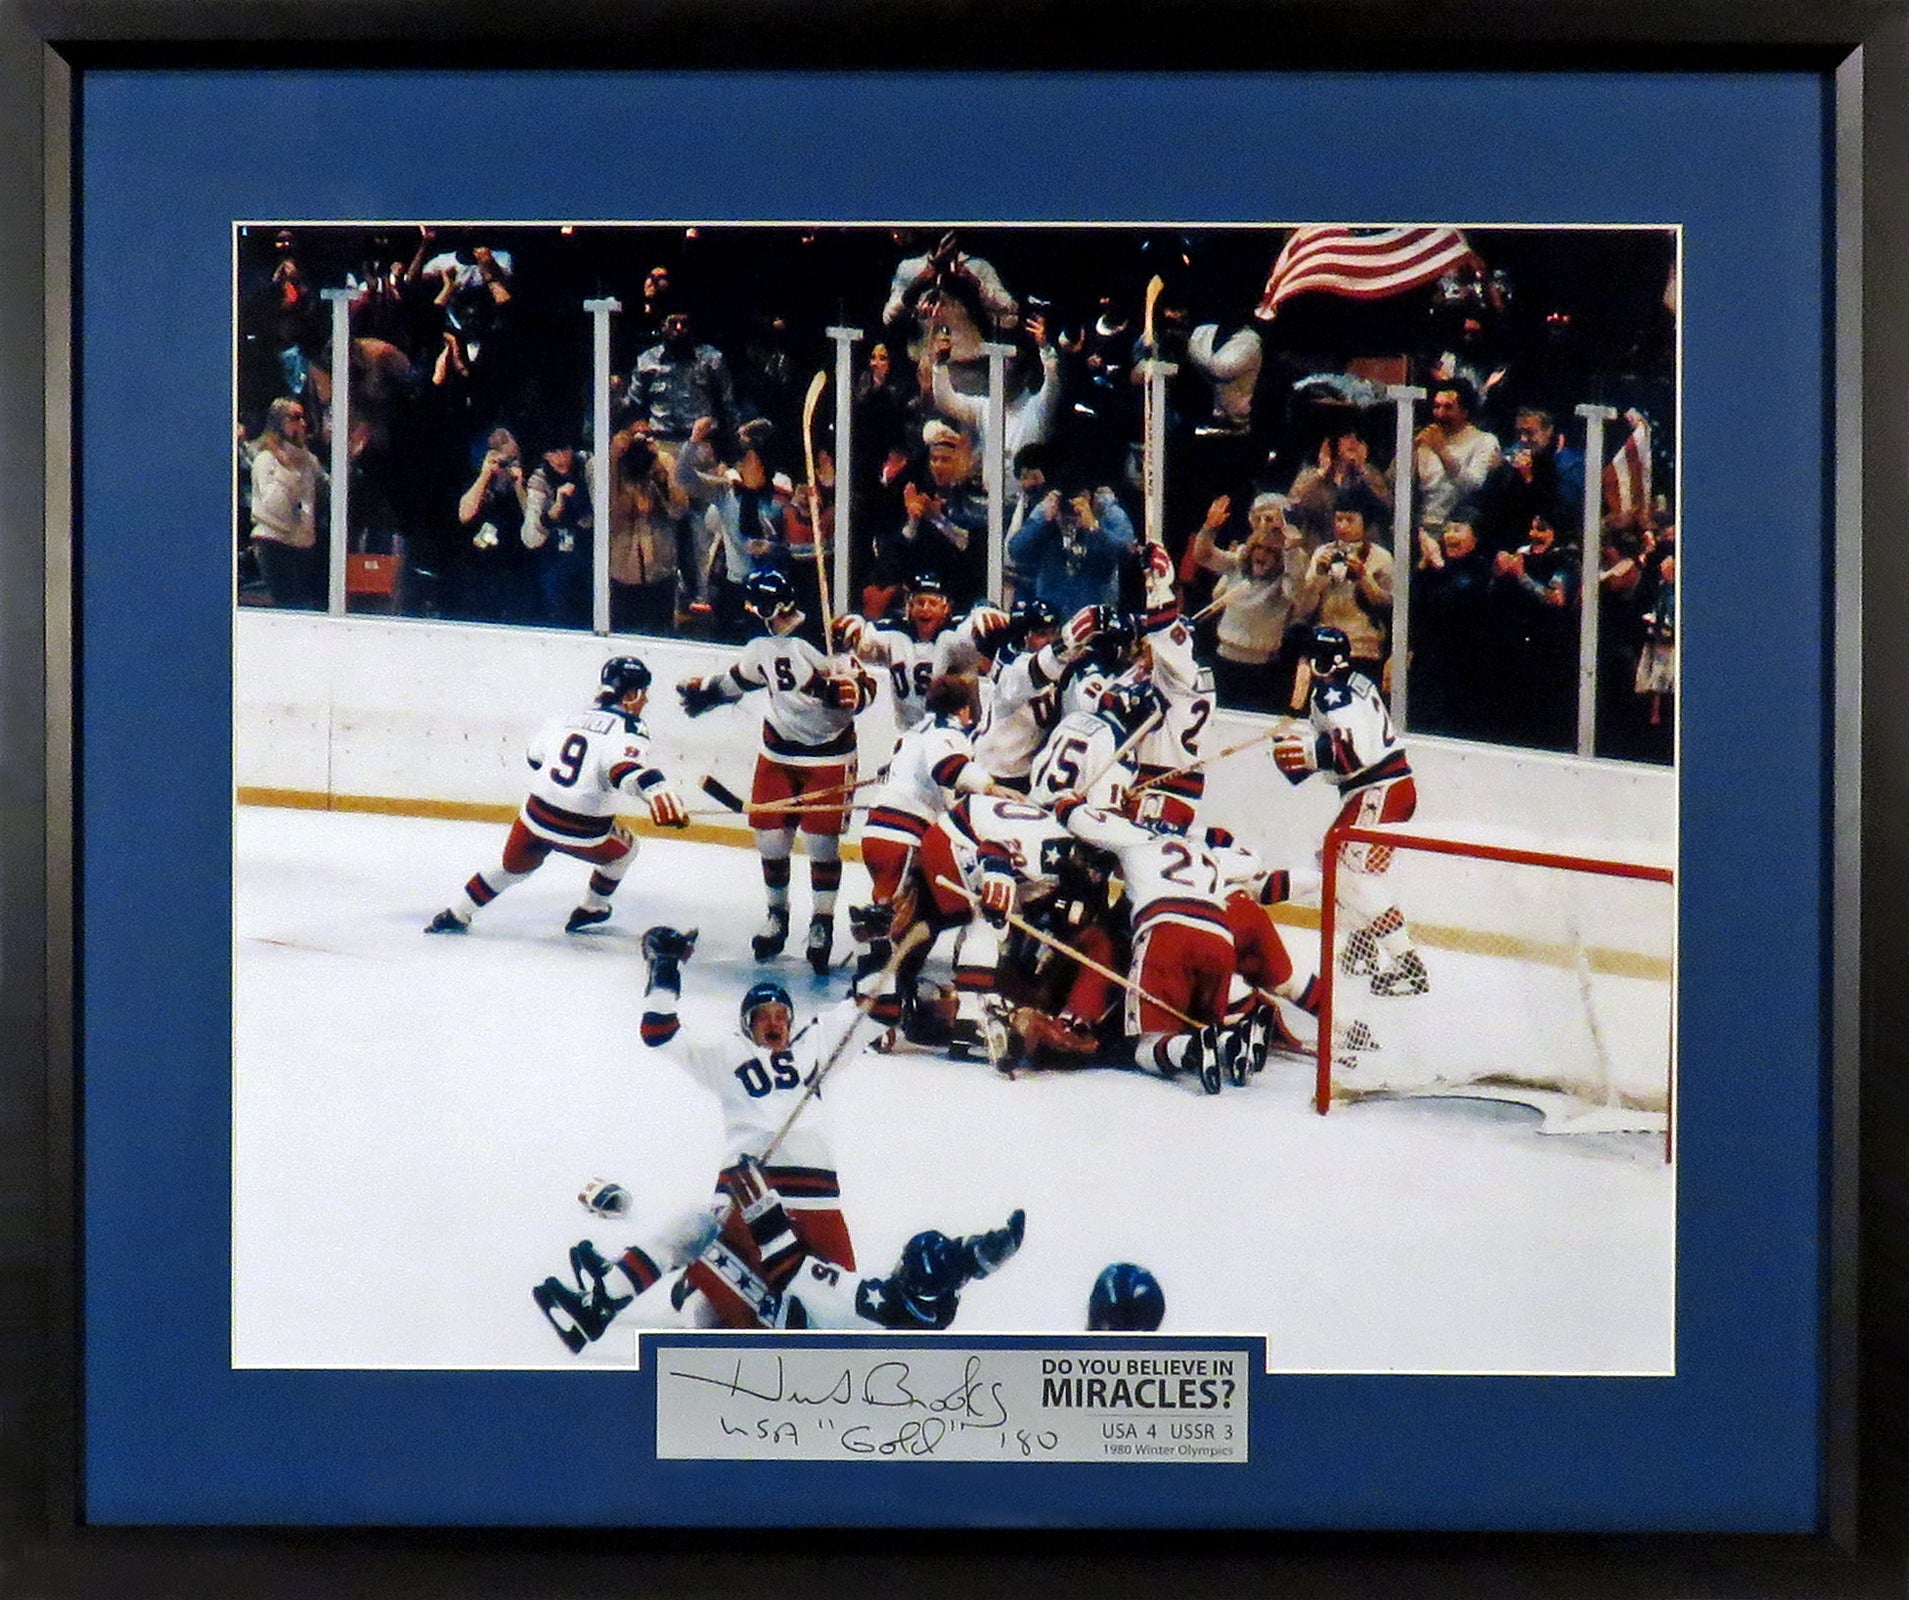 Mark Pavelich, 1980 'Miracle on Ice' Team USA gold-medal winner